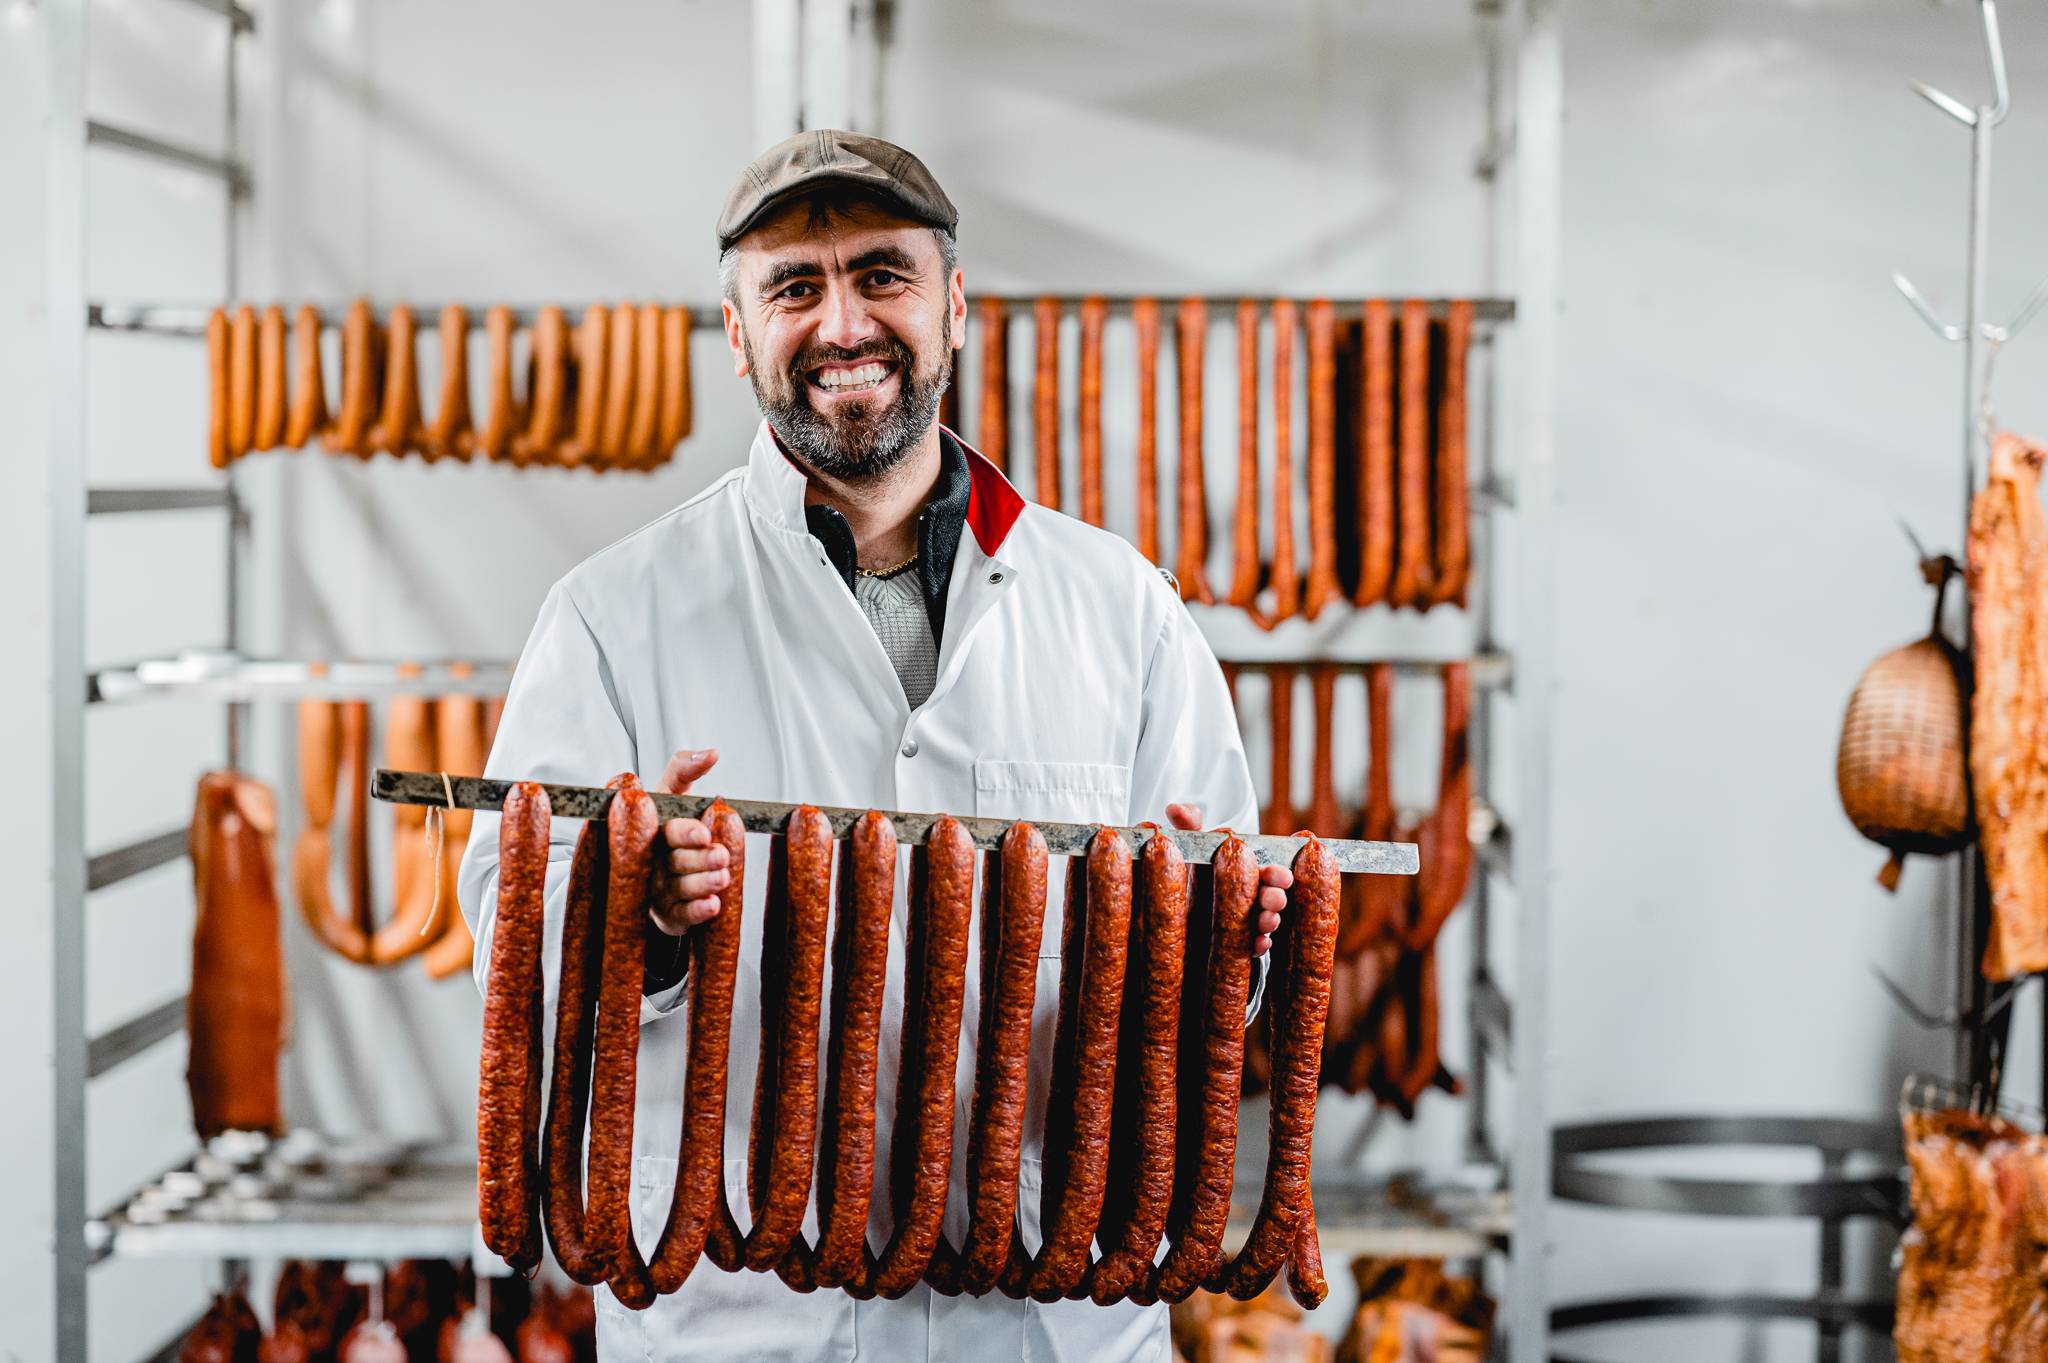 Charcuterie Balkani: Local Products with a Taste of Romania